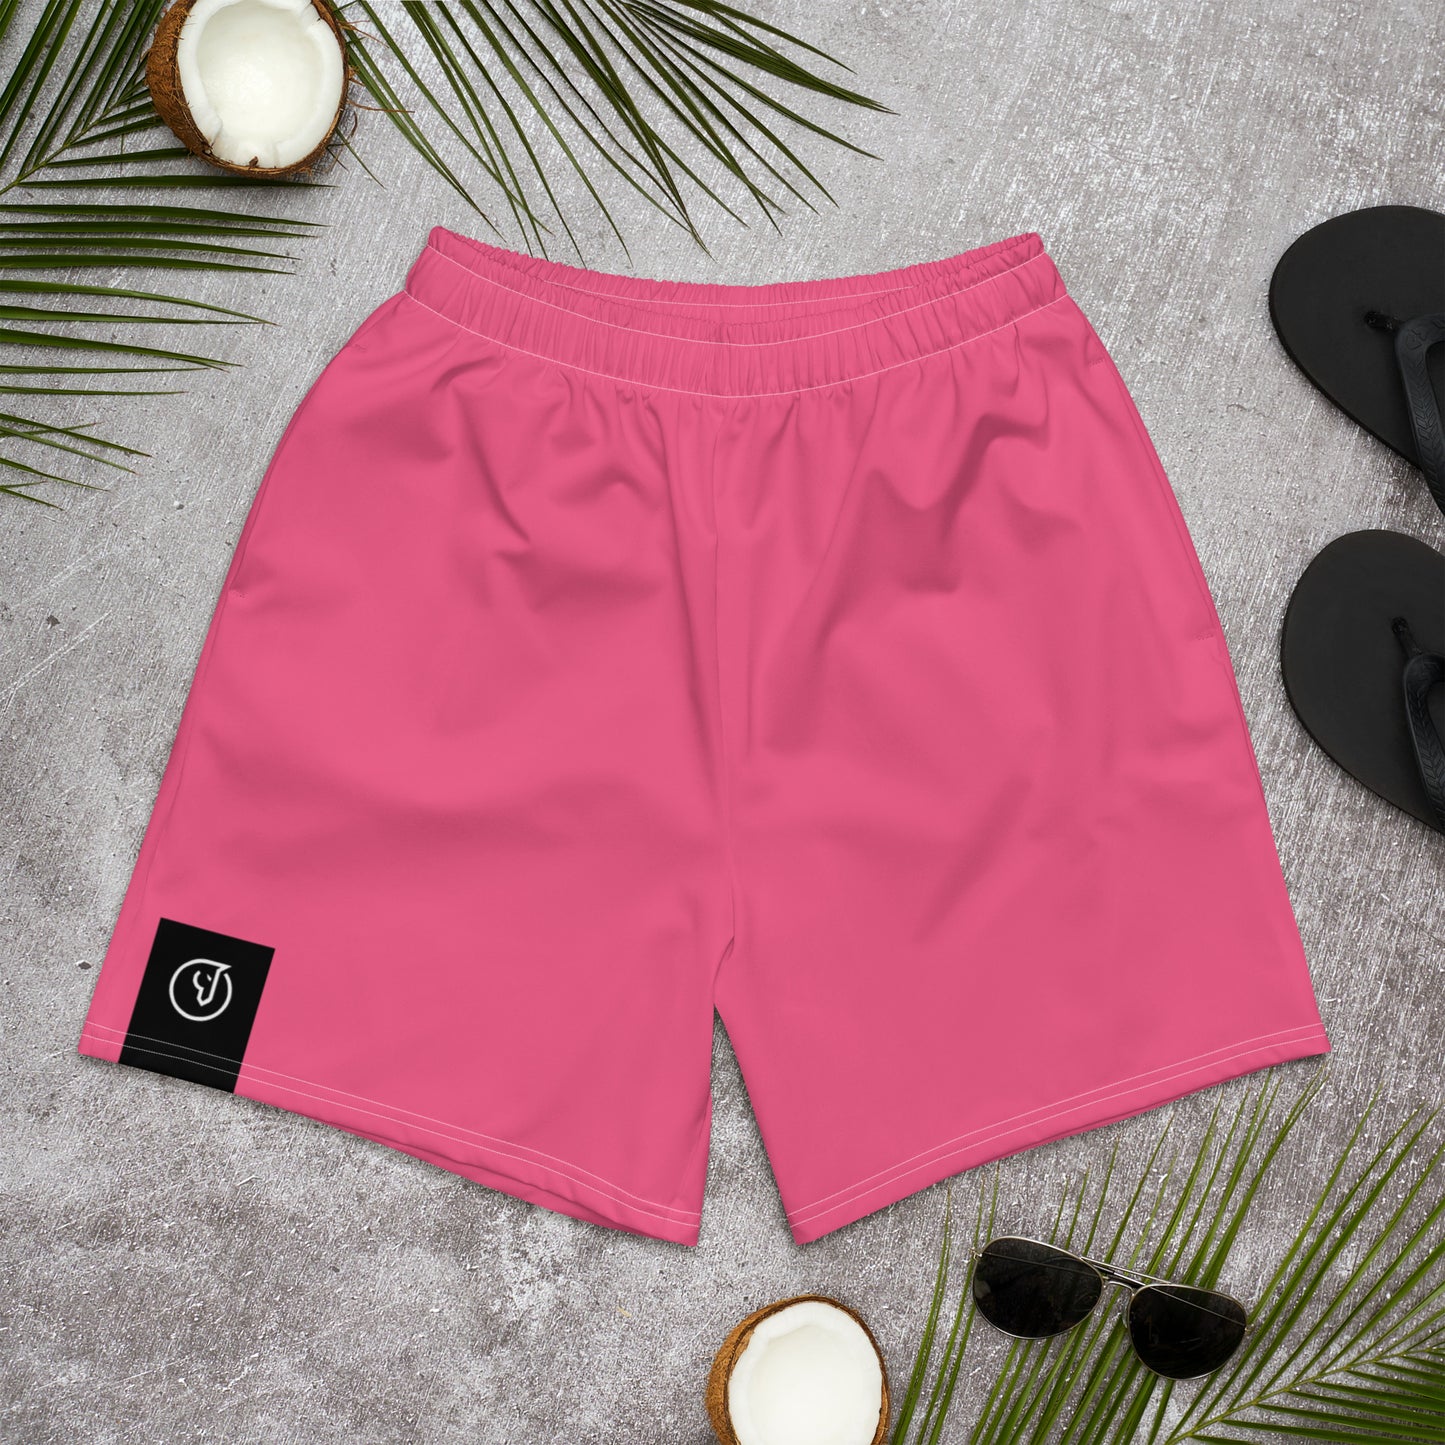 Humble Sportswear, men's color match shorts pink